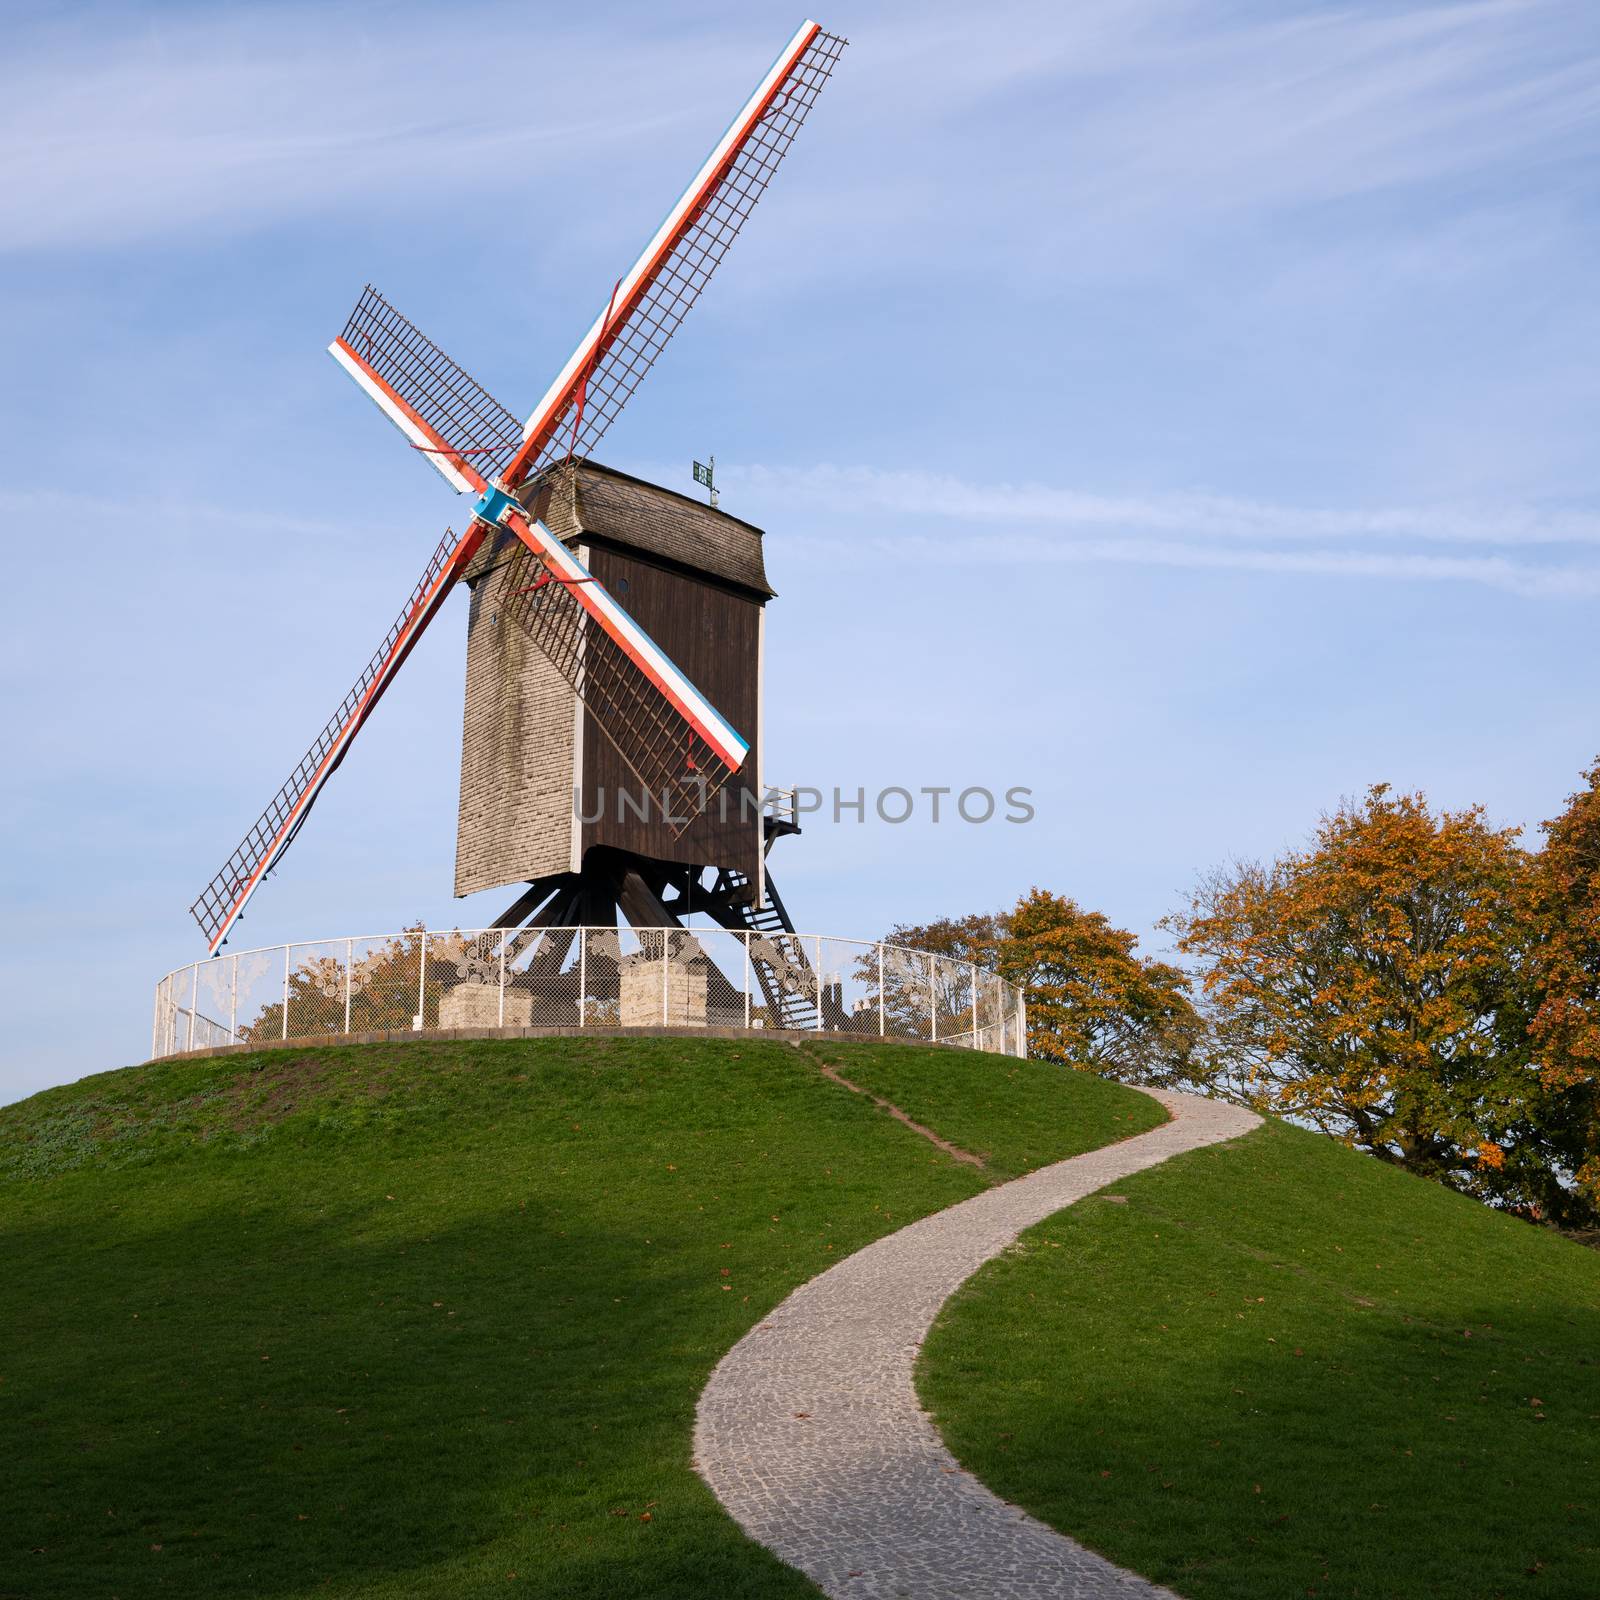 Historic windmill close to the canals of Bruges with autumnal colored trees, Belgium